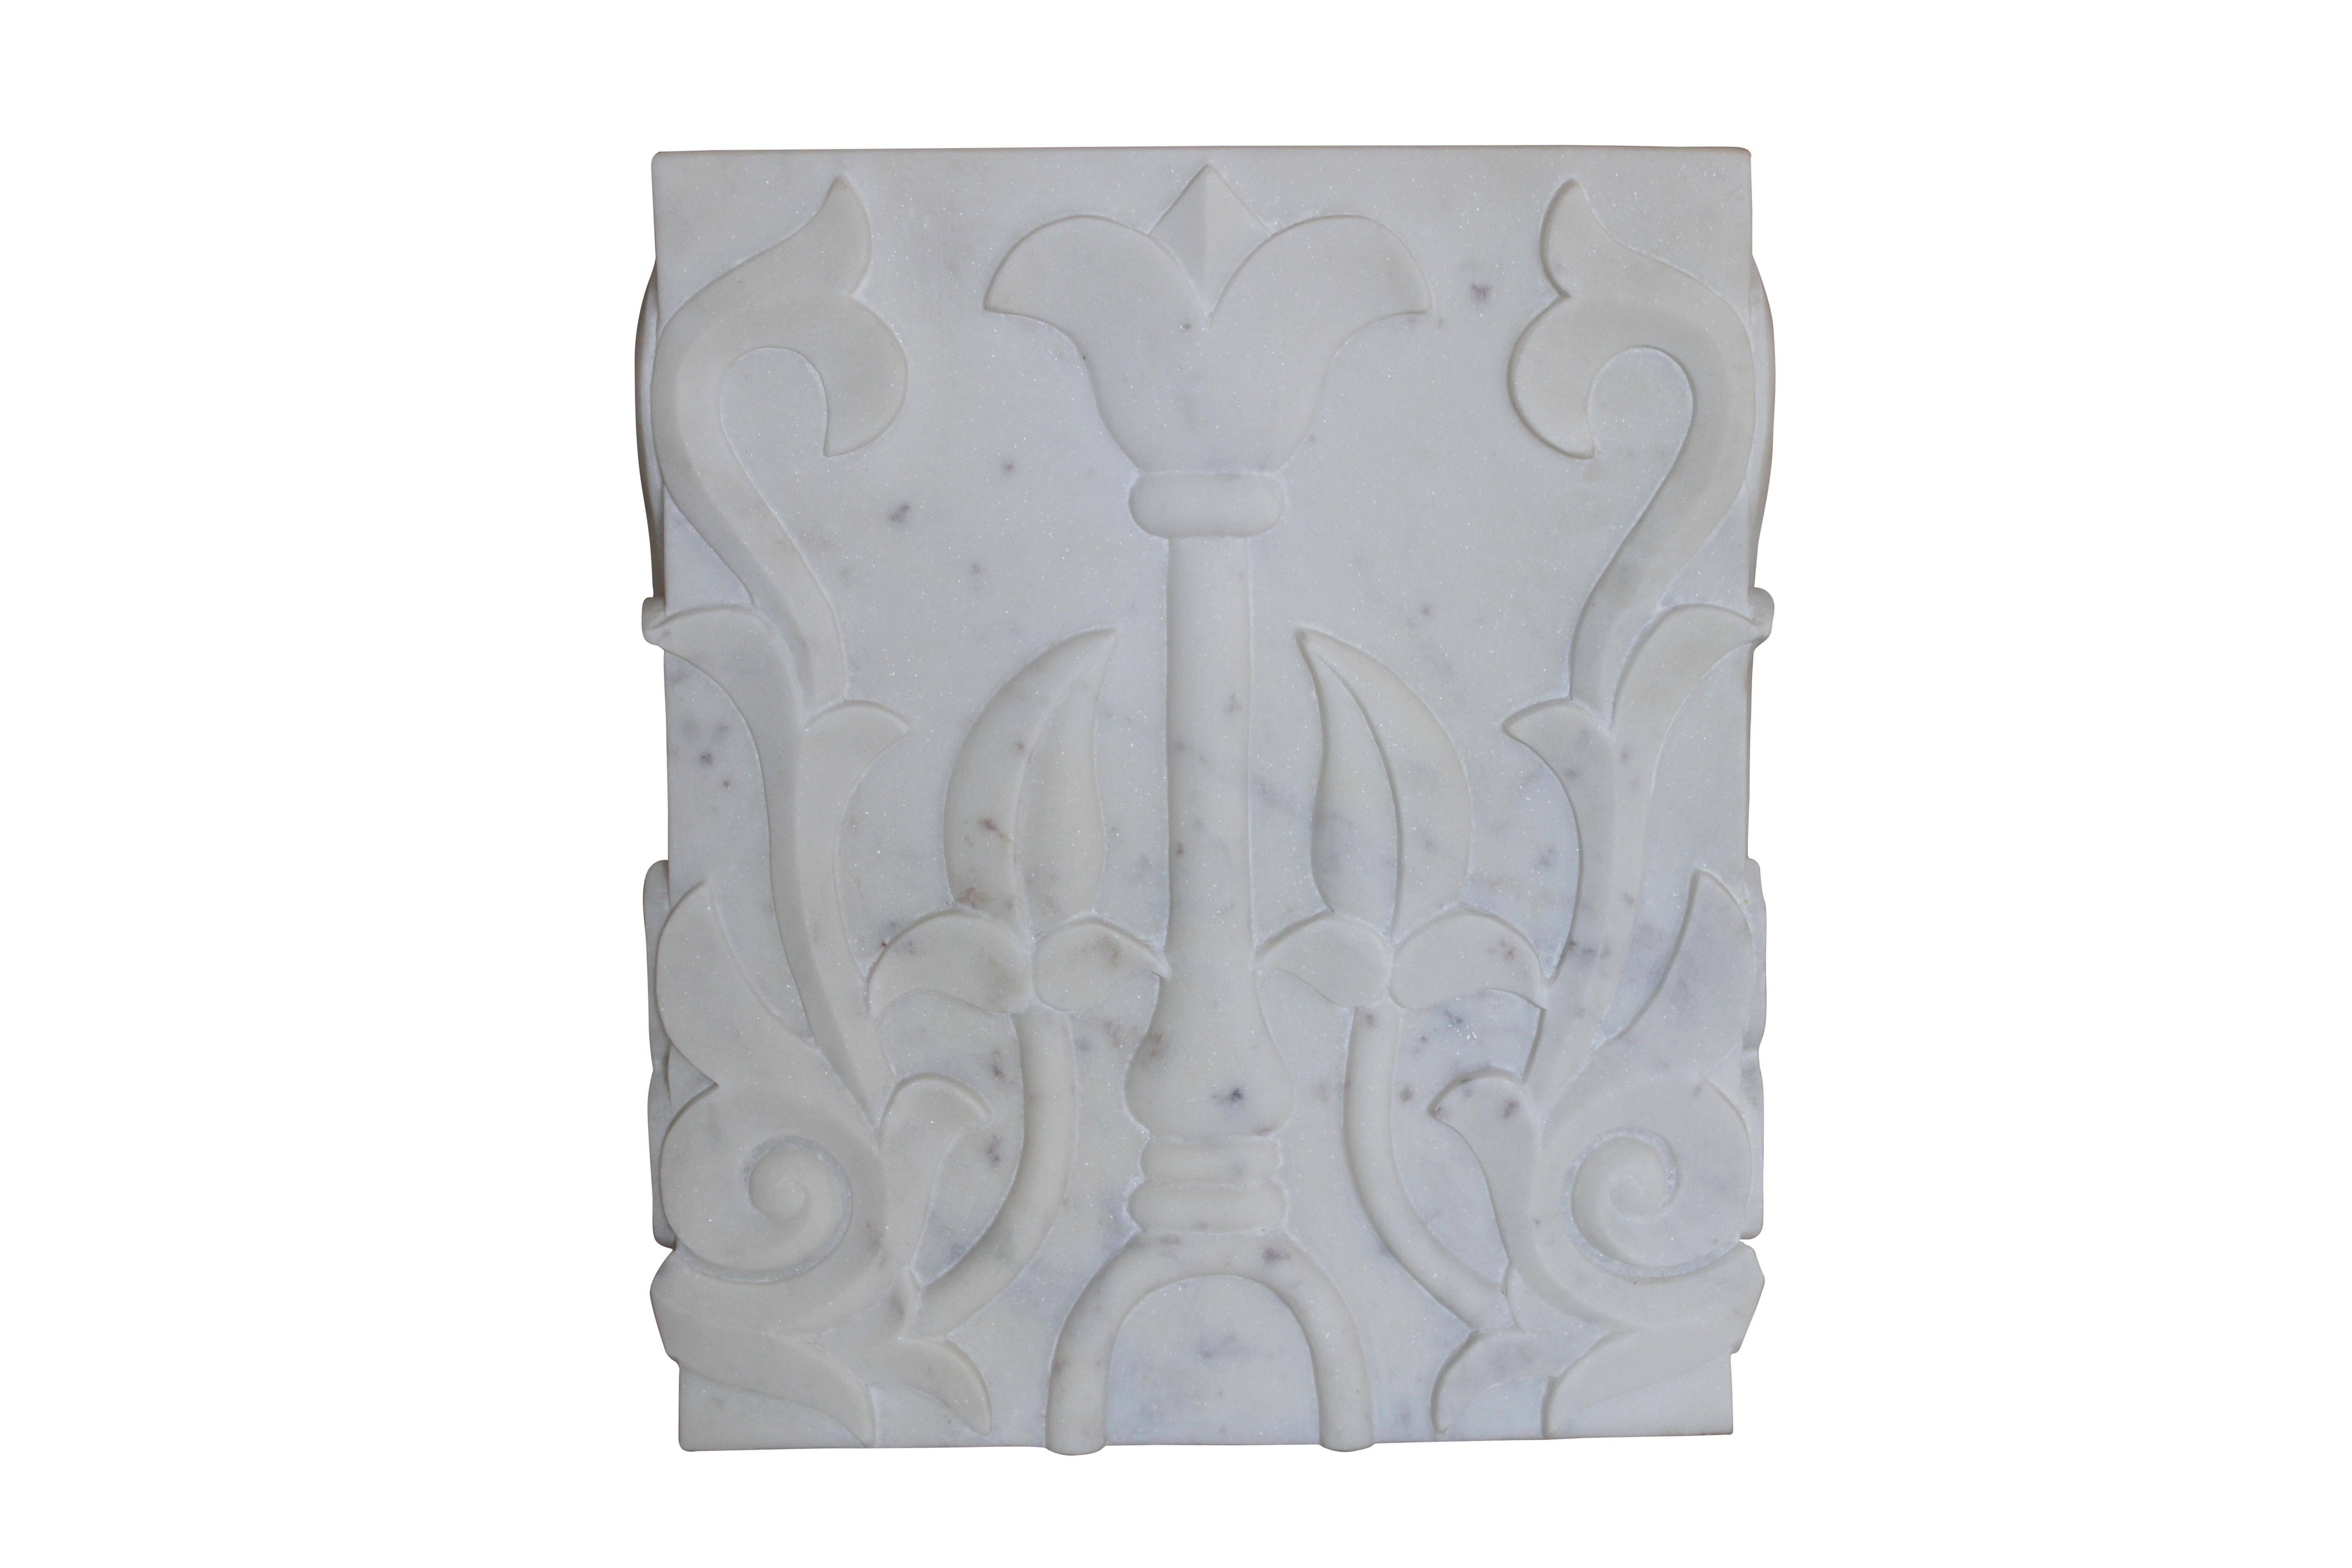 A hand-carved, white marble, square pedestal based on the ancient Tibetan lotus motif.

Lotus carved Pedestal
Size-12” x 12” x 14”
Material- White Marble

Buyer Cancellation-
The cancellation charge is 25% which increases to 50% if the production is